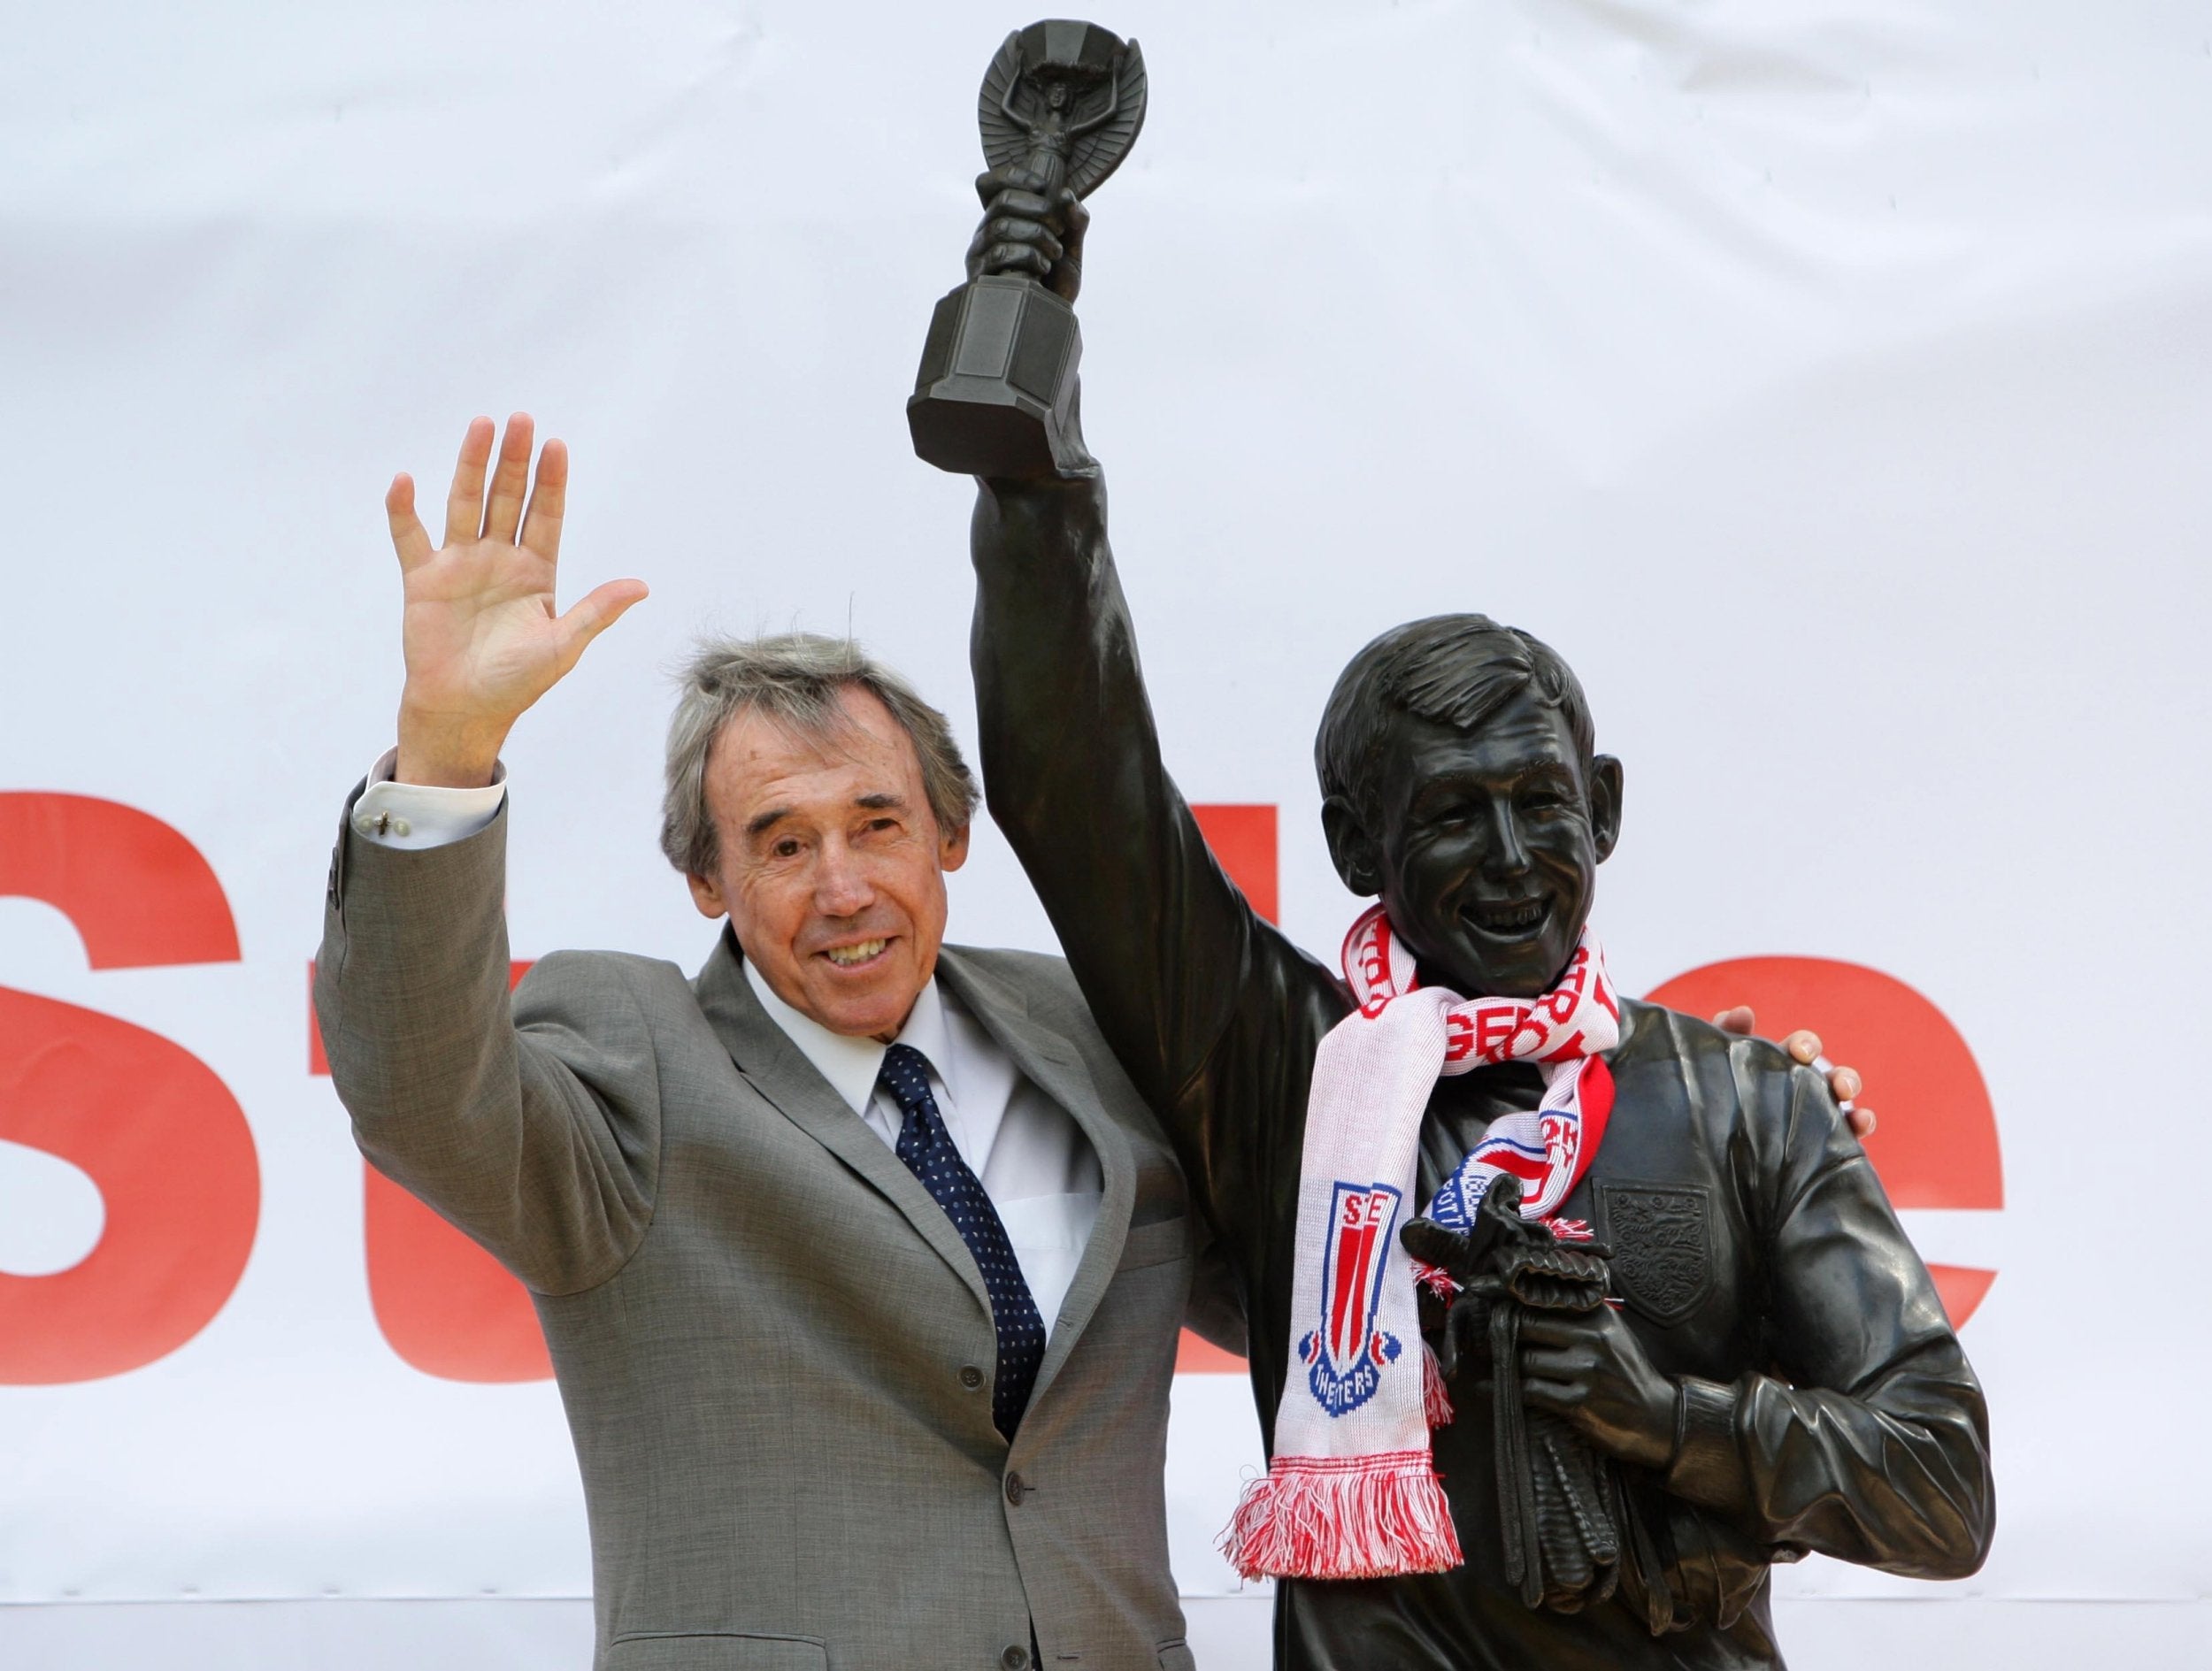 Banks next to his statue in Stoke in 2008